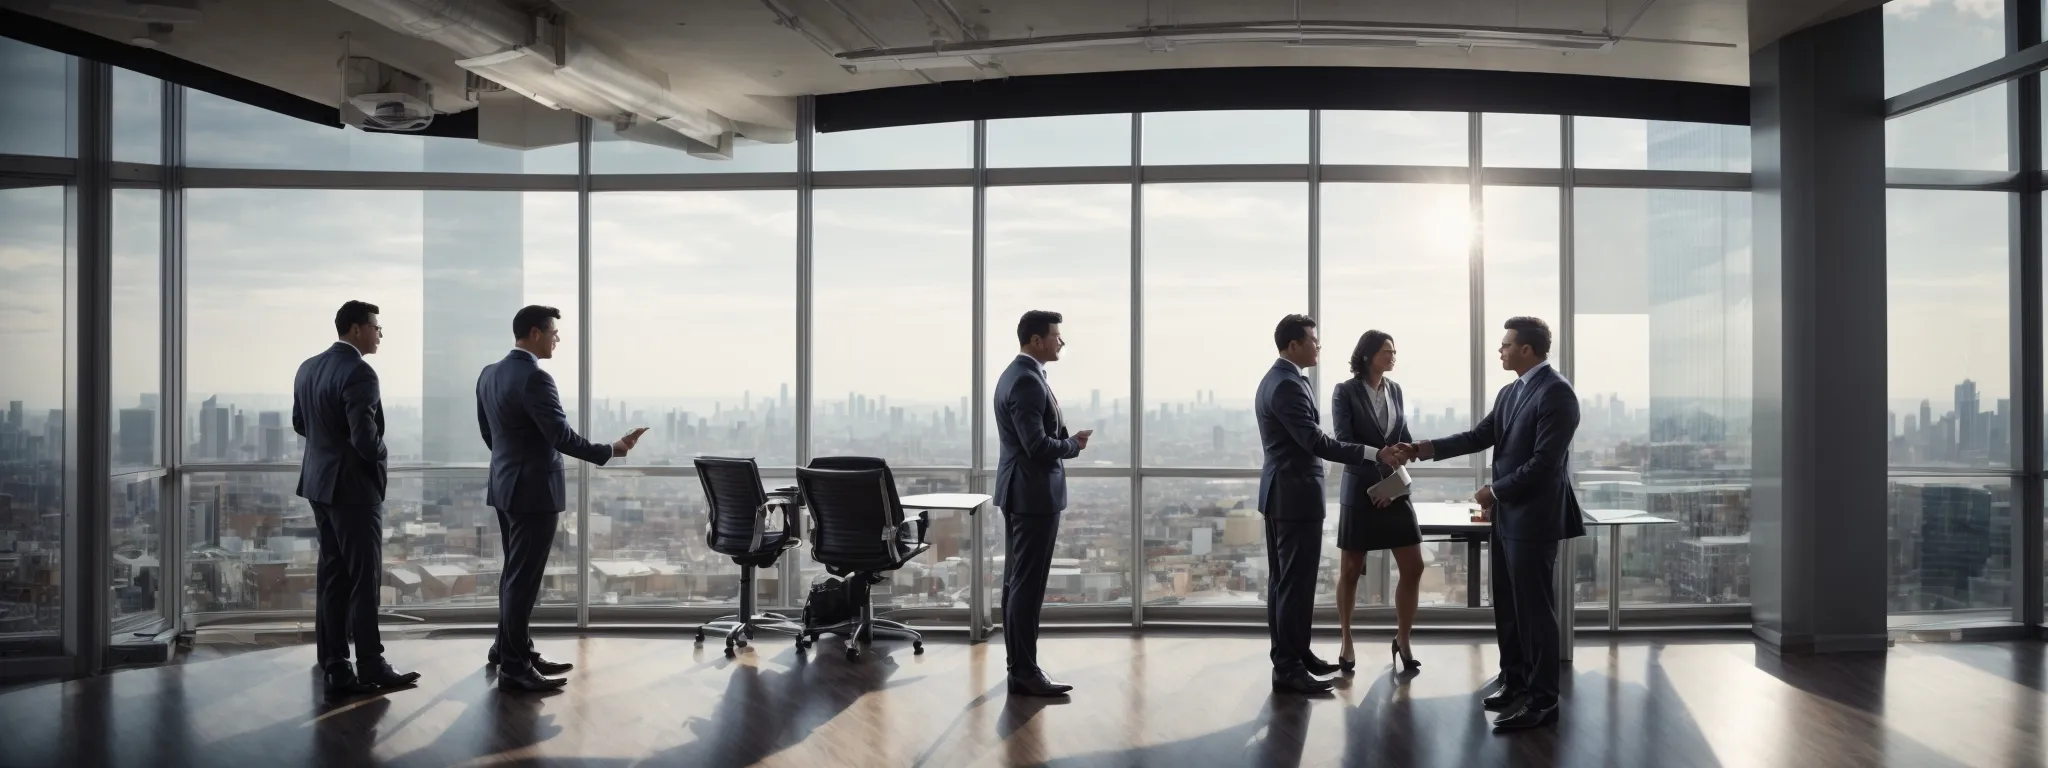 corporate executives shaking hands in a modern office building overlooking a bustling city skyline, symbolizing a partnership agreement.